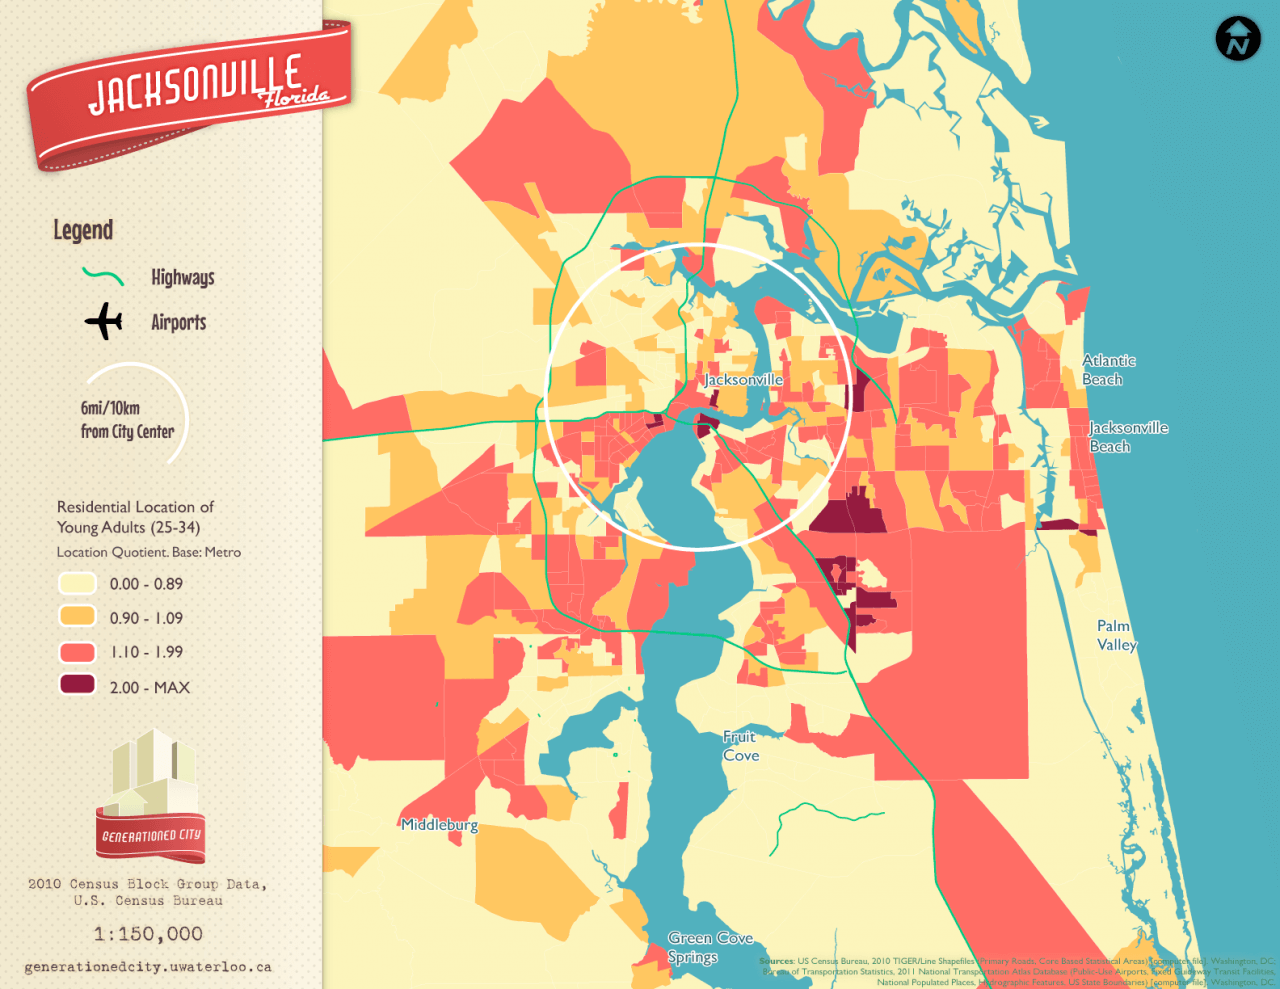 Residential location of young adults in Jacksonville.